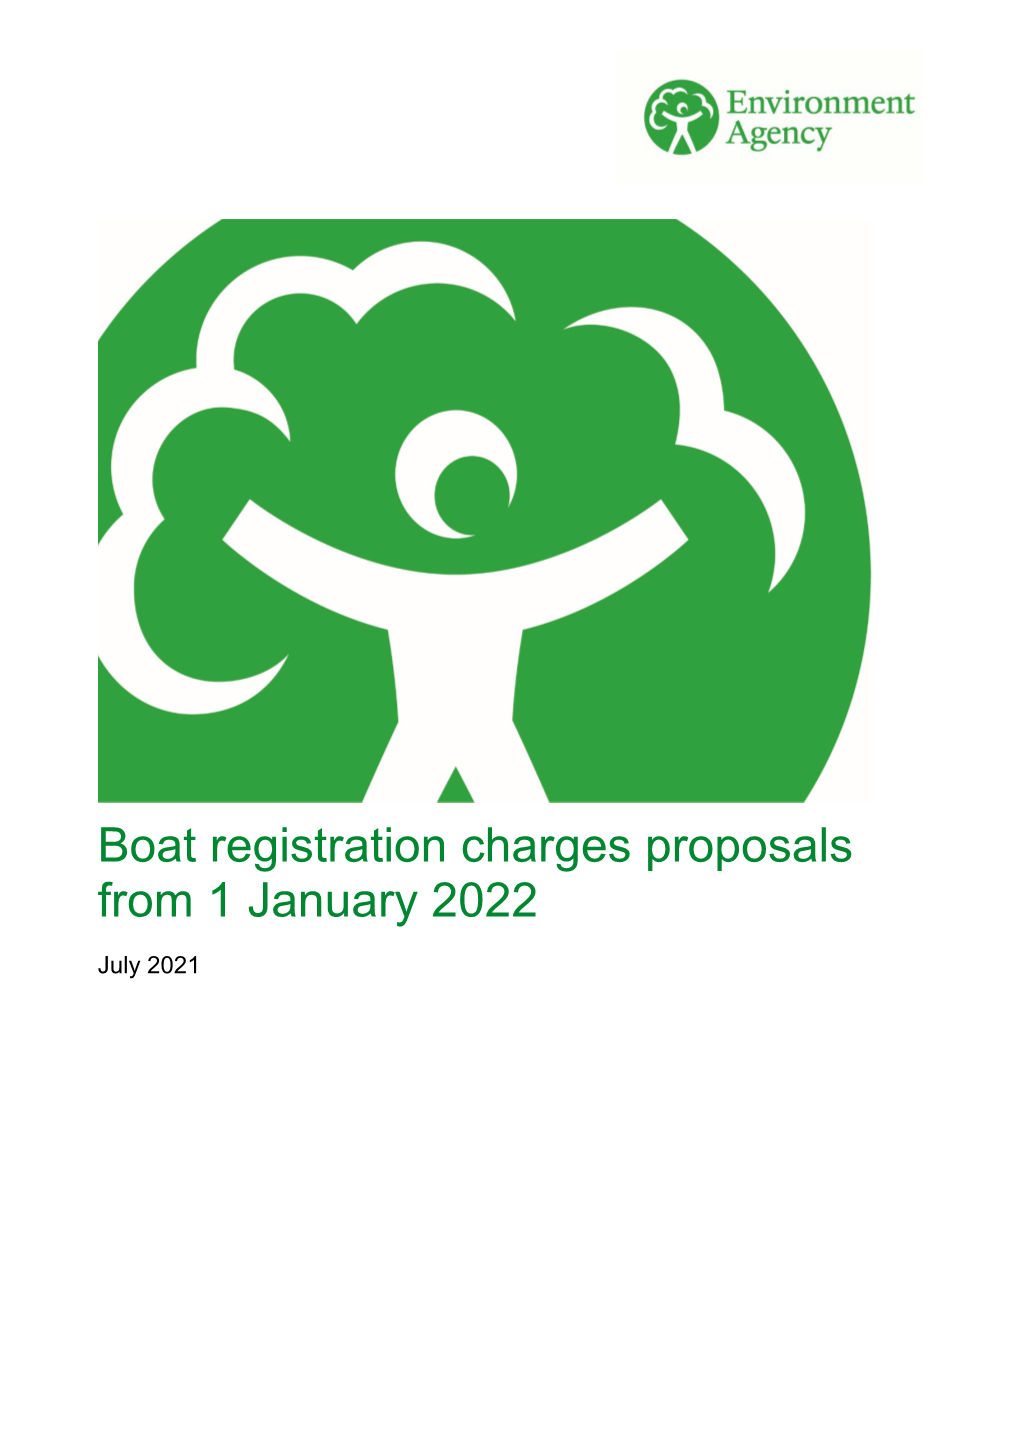 Boat Registration Charges Proposals from 1 January 2022